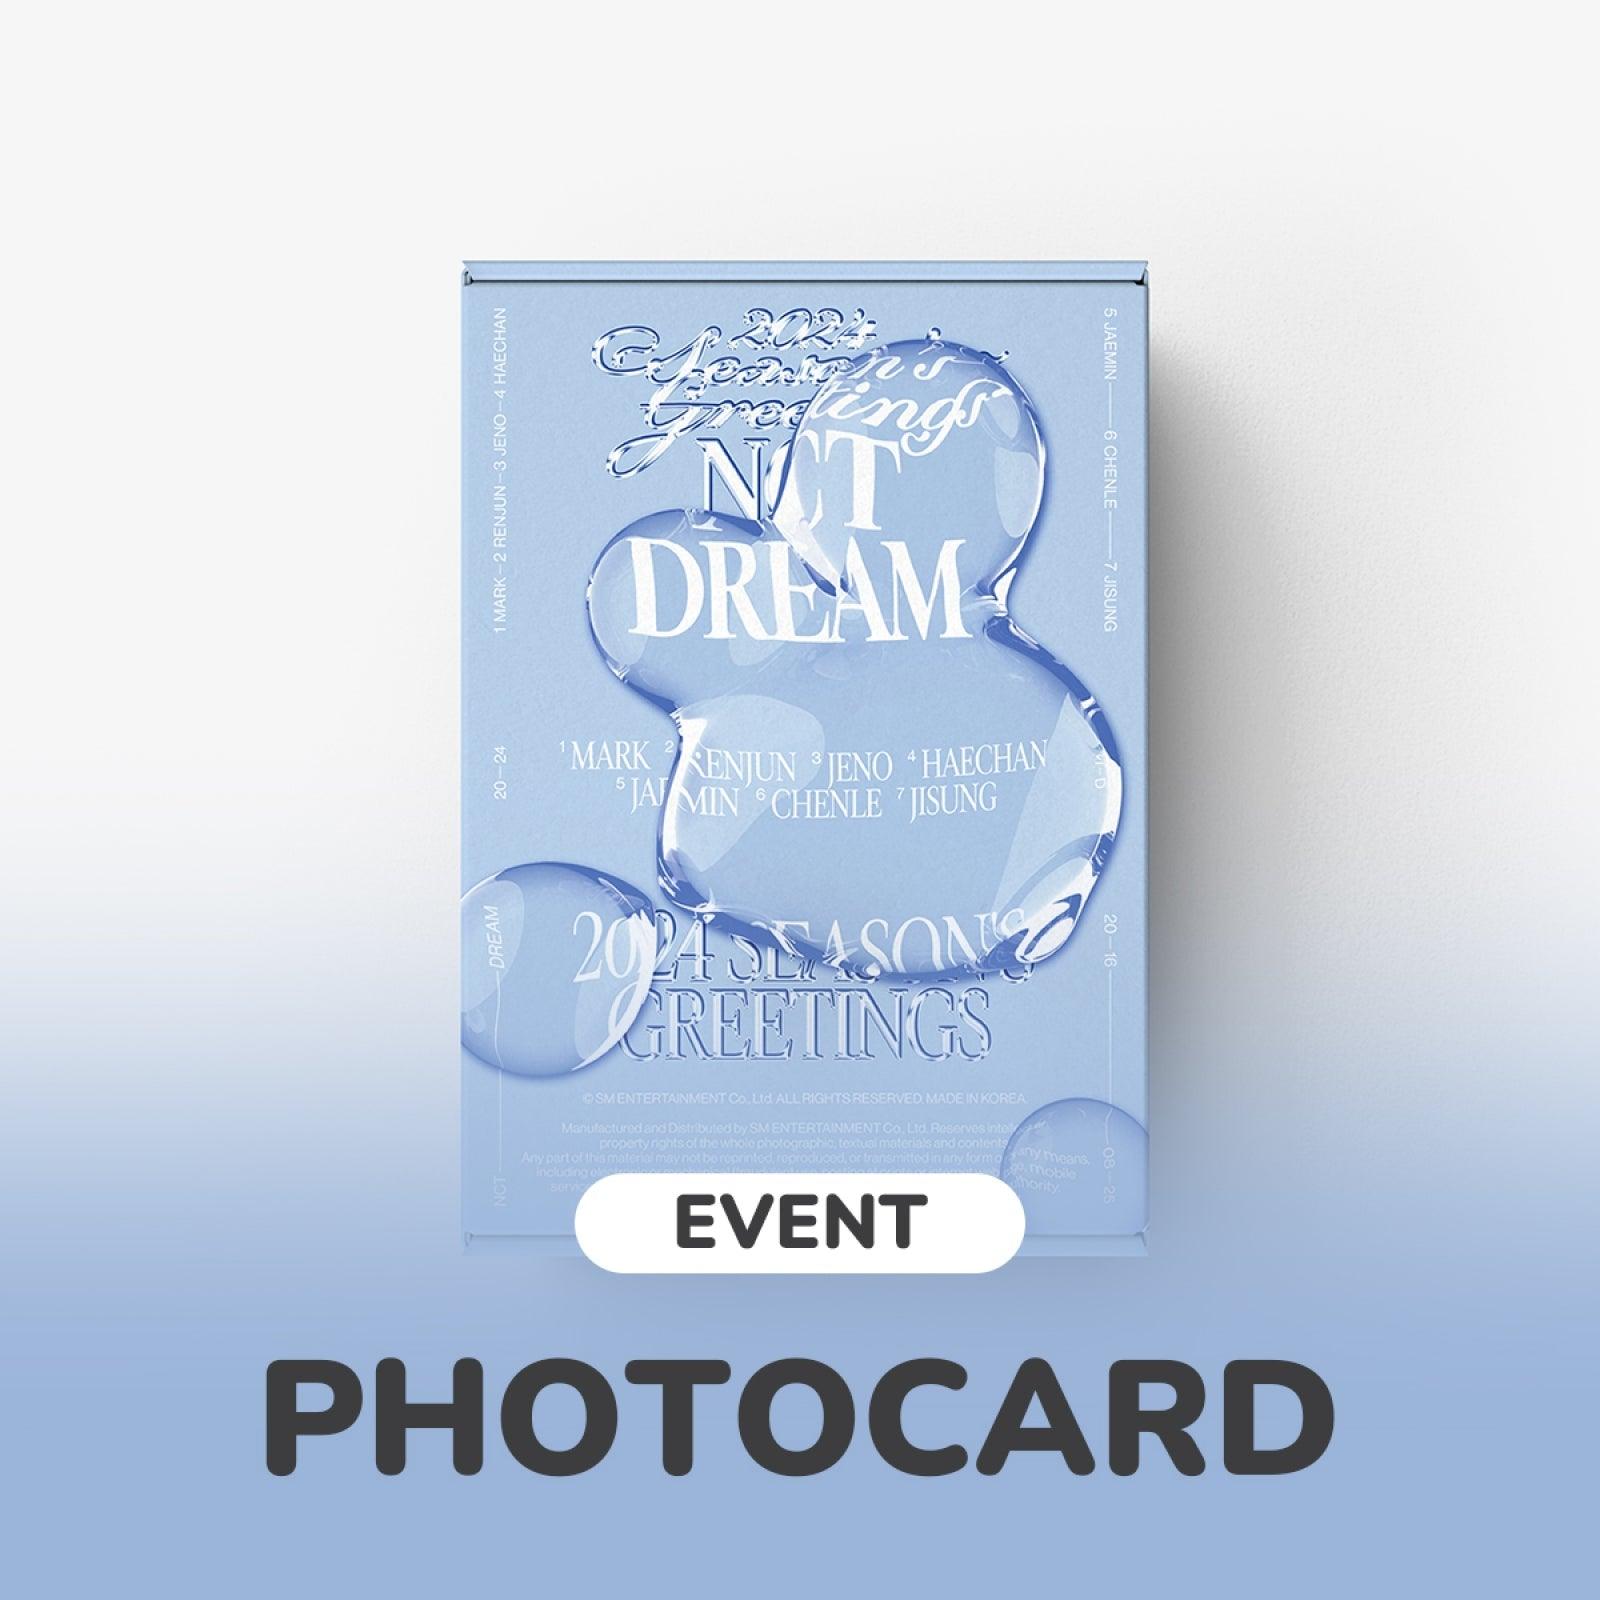 [PRE - ORDER] SM ENTERTAINMENT 2024 SEASON’S GREETINGS [PHOTO CARD EVENT](HOTTRACKS VER.) - Shopping Around the World with Goodsnjoy